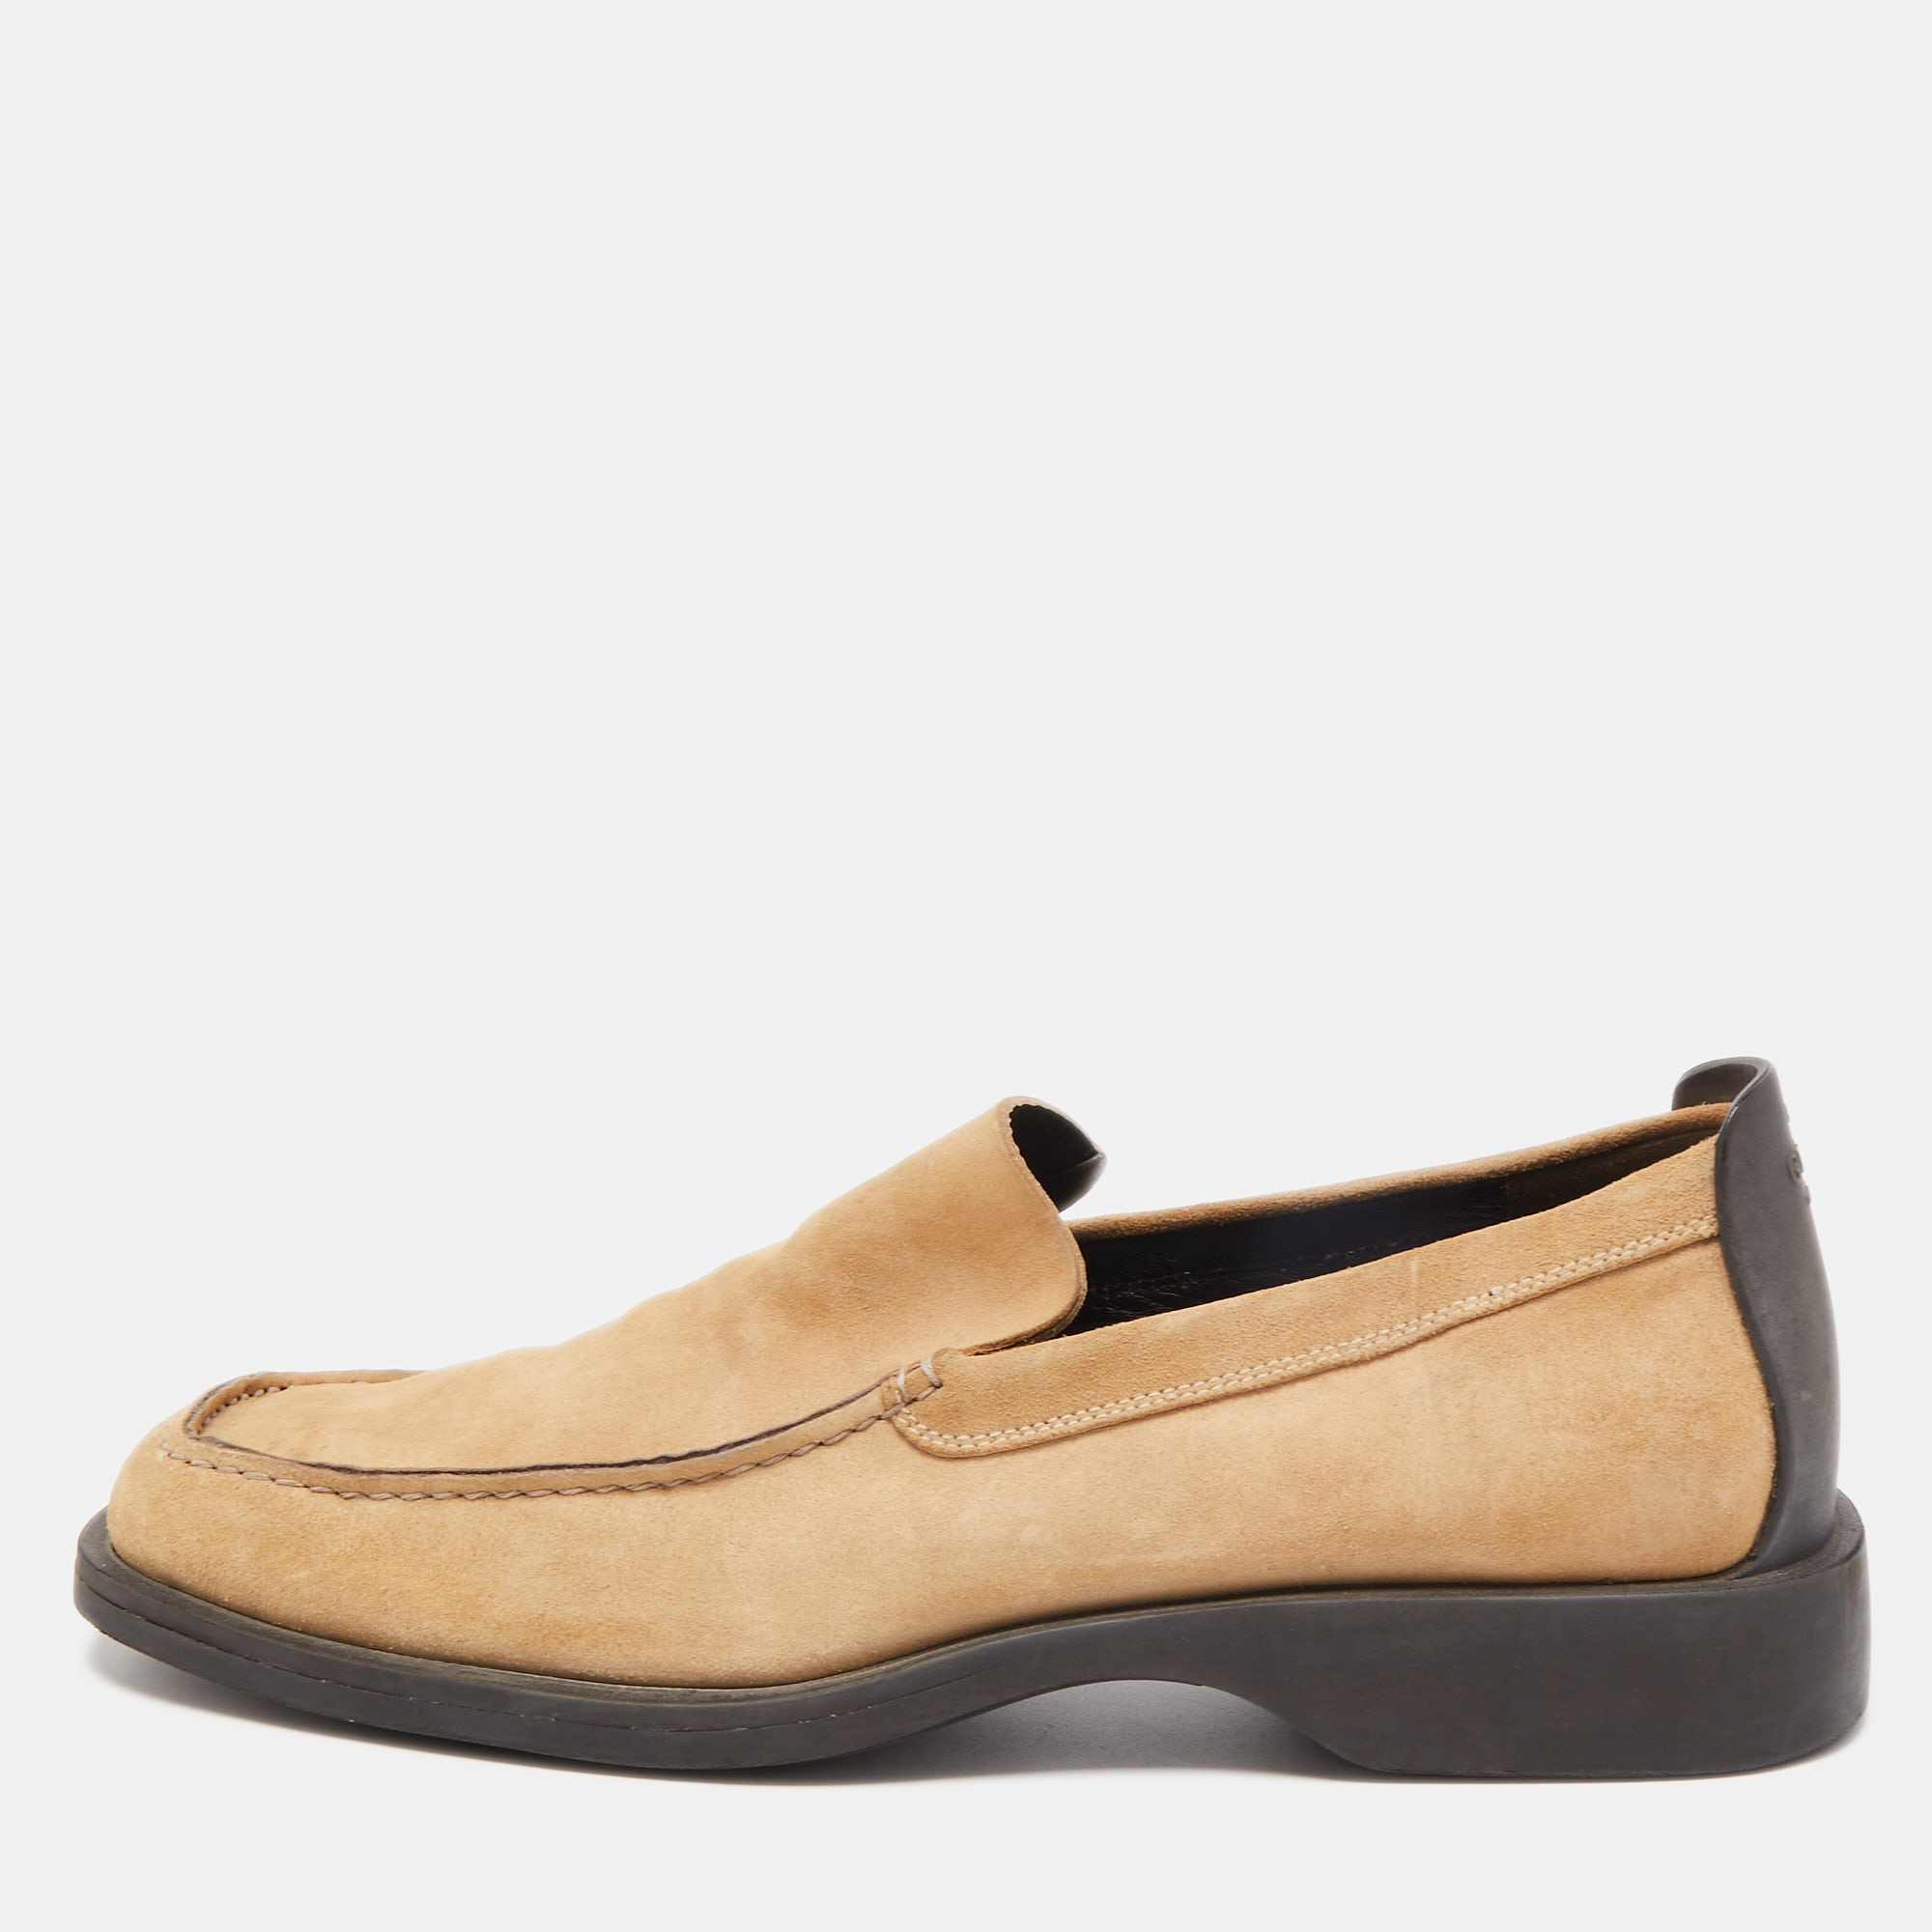 Gucci beige suede slip on loafers size 43.5